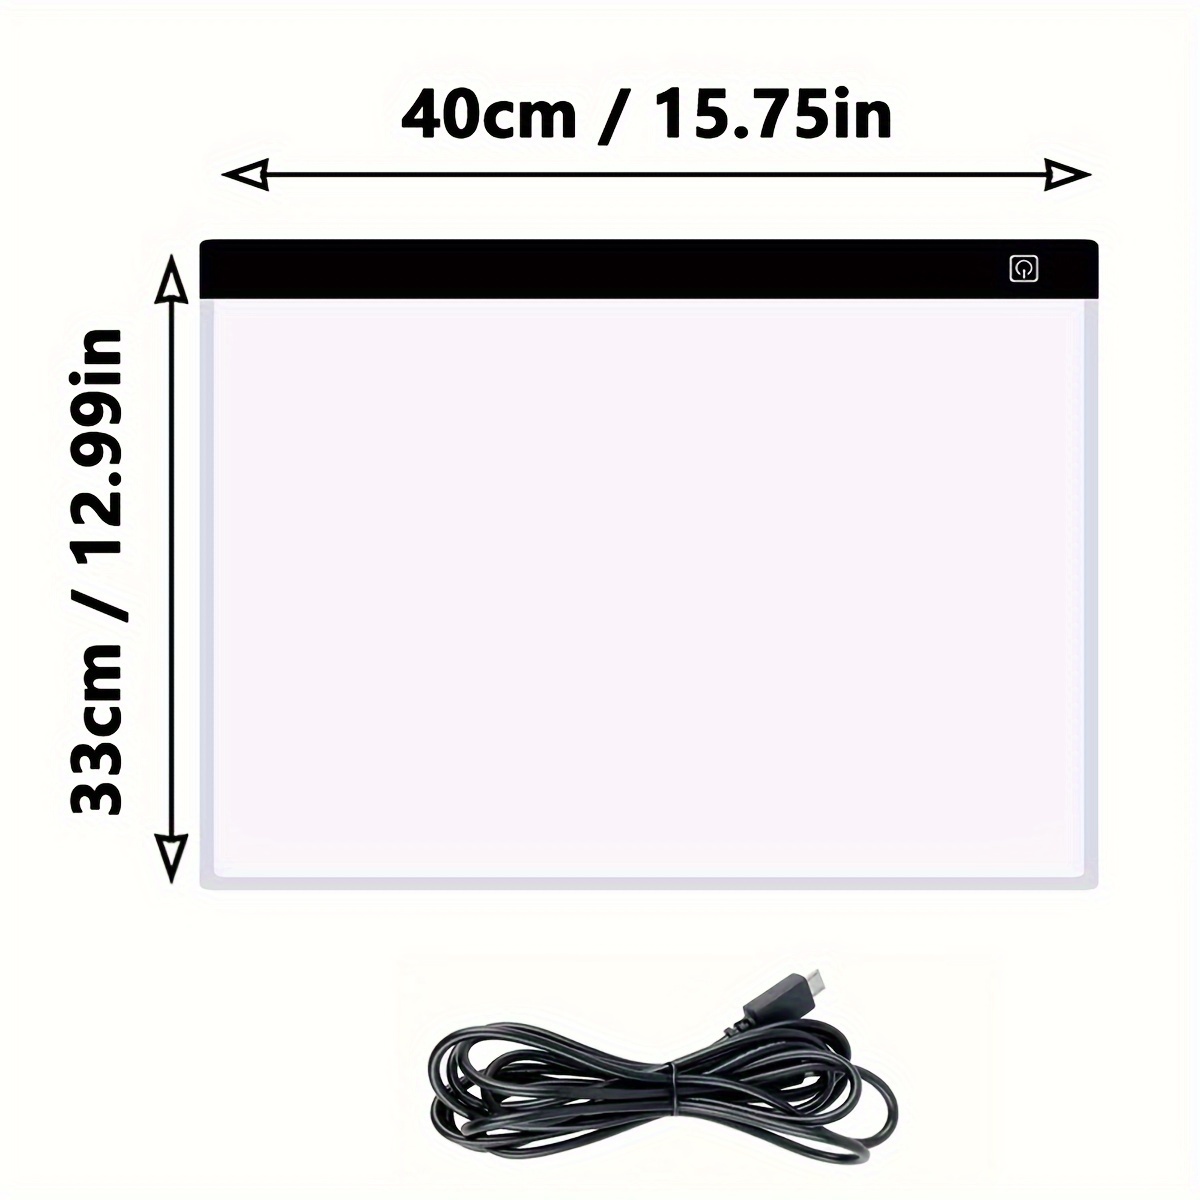 A4 LED Copy Board Light Tracing Box Ultra-Thin USB Power Cable